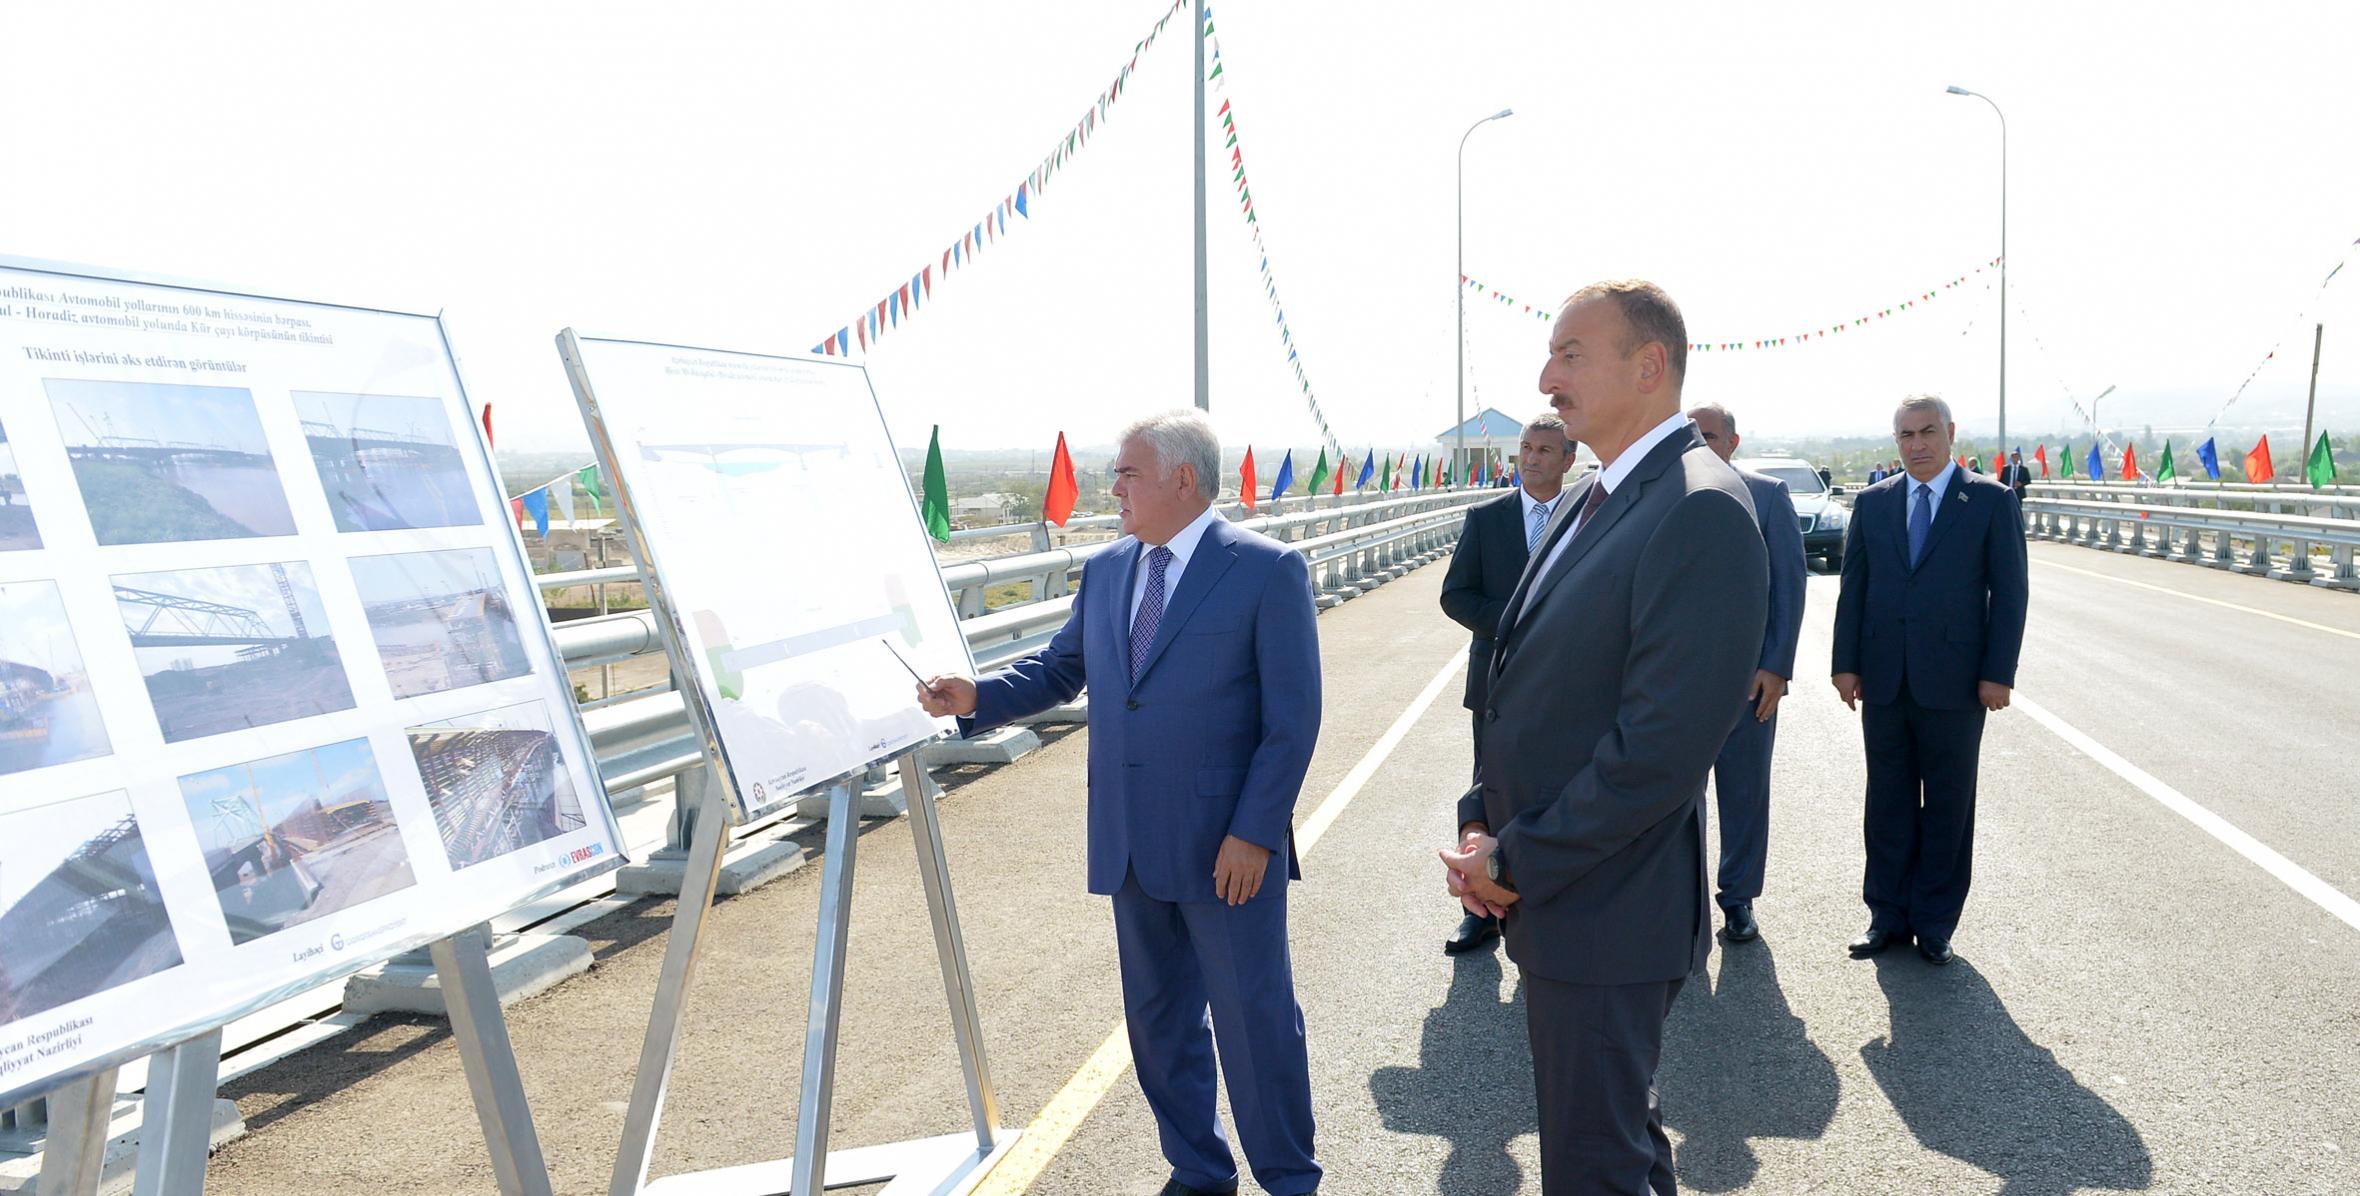 Ilham Aliyev attended the opening of a bridge over the Kur River in Shirvan